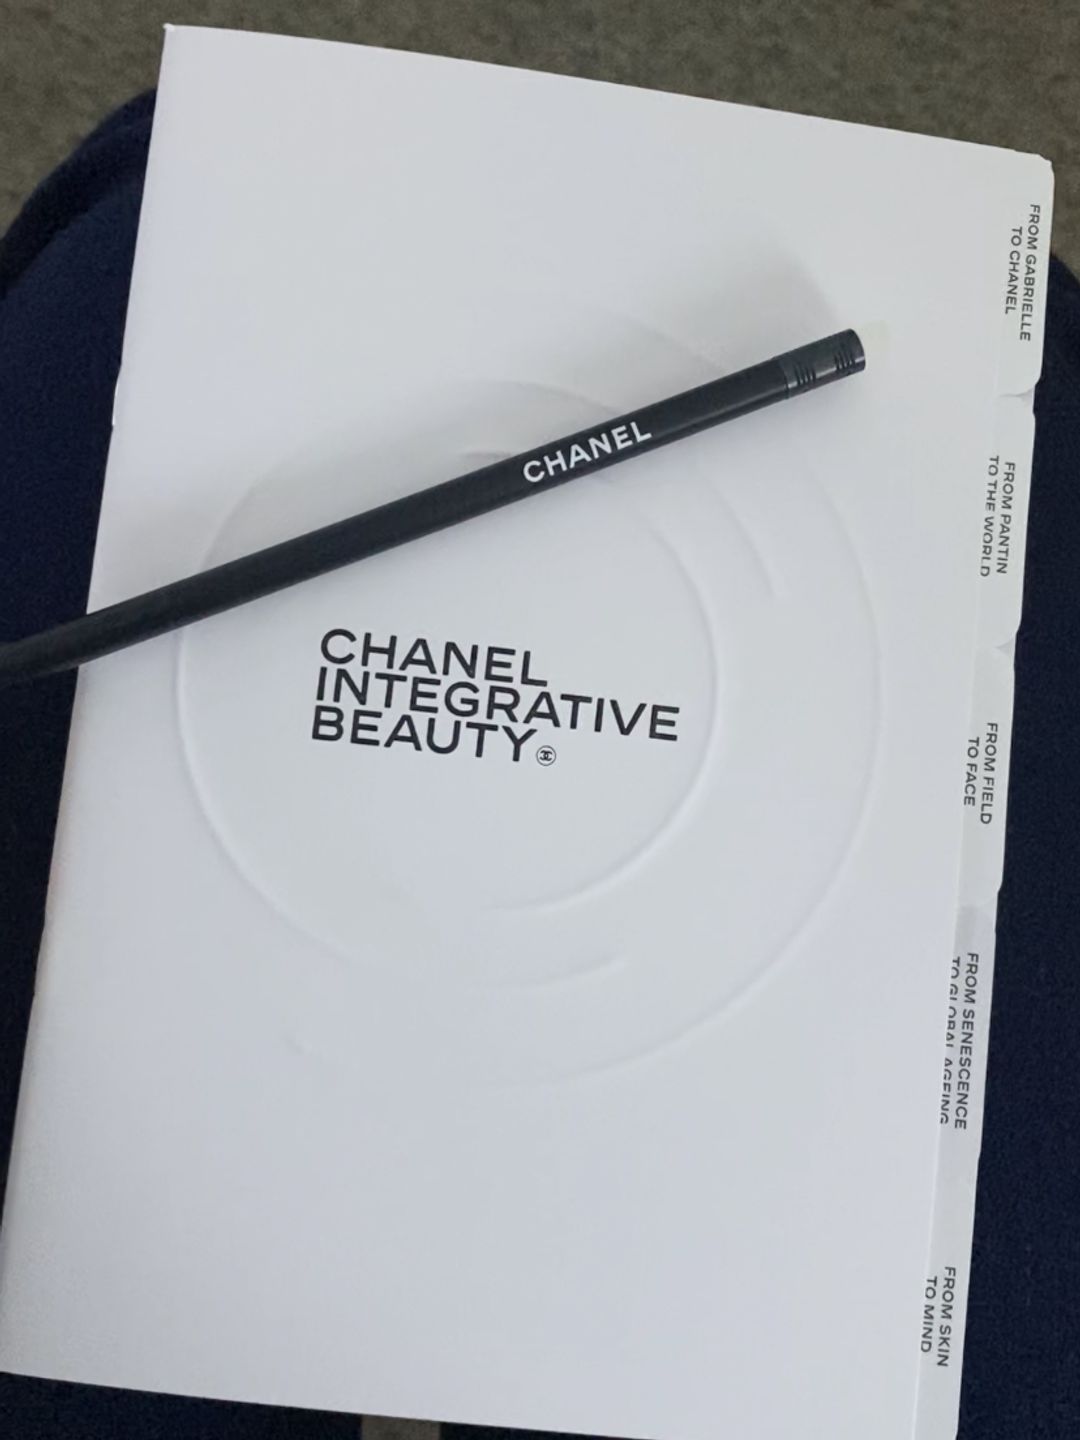 Chanel pencil and notepad 